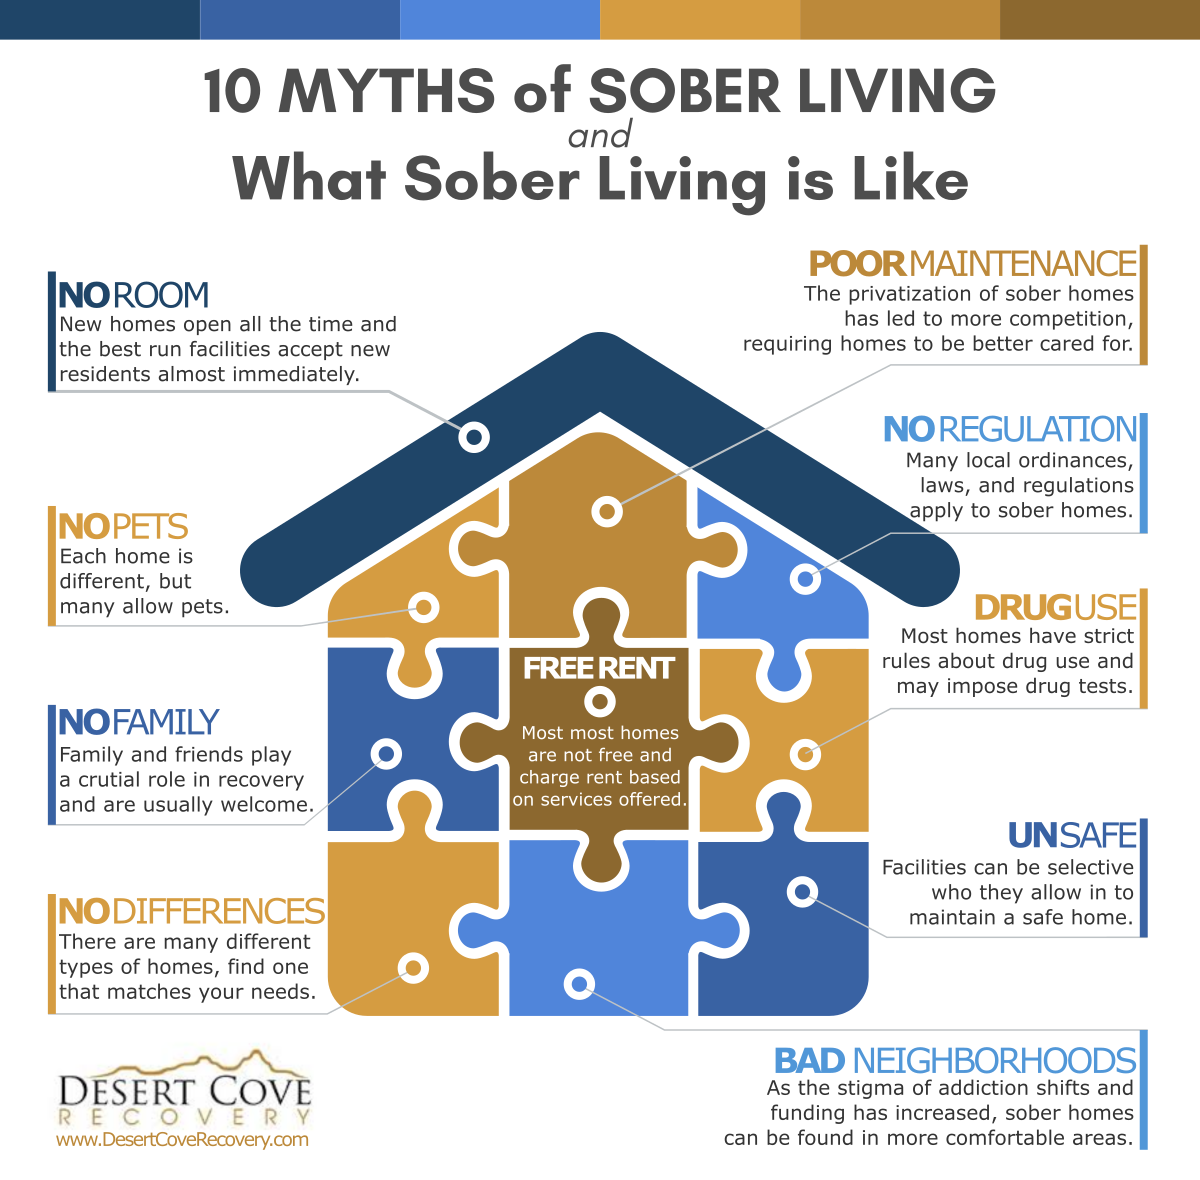 myths of sober living and what it's like